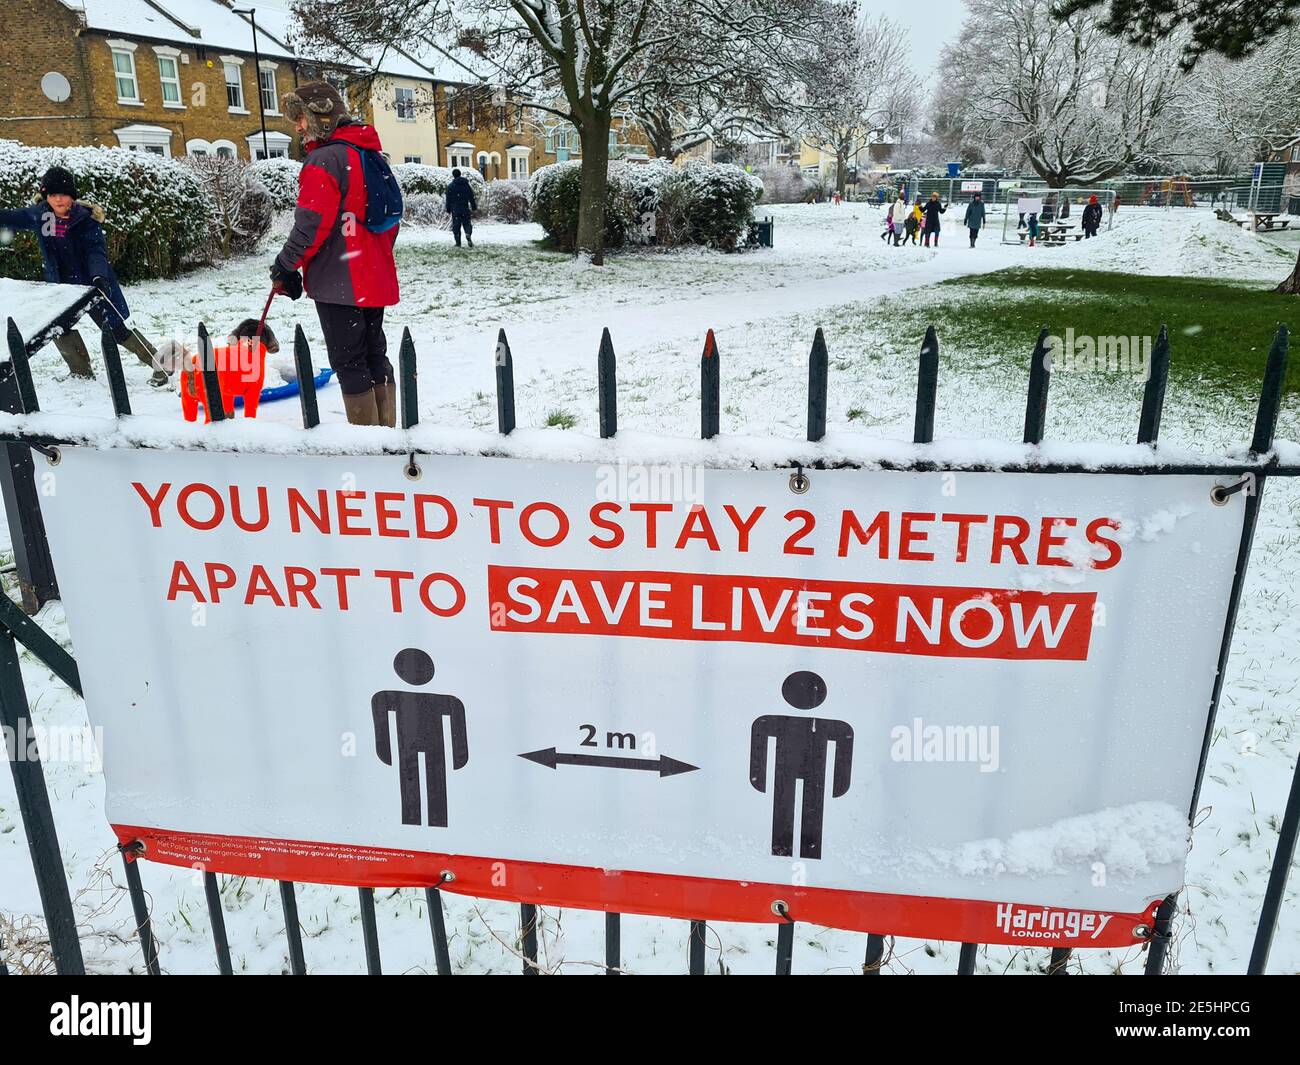 A rare snowfall in London enticed people out to exercise despite Covid-19 lockdown. Stock Photo